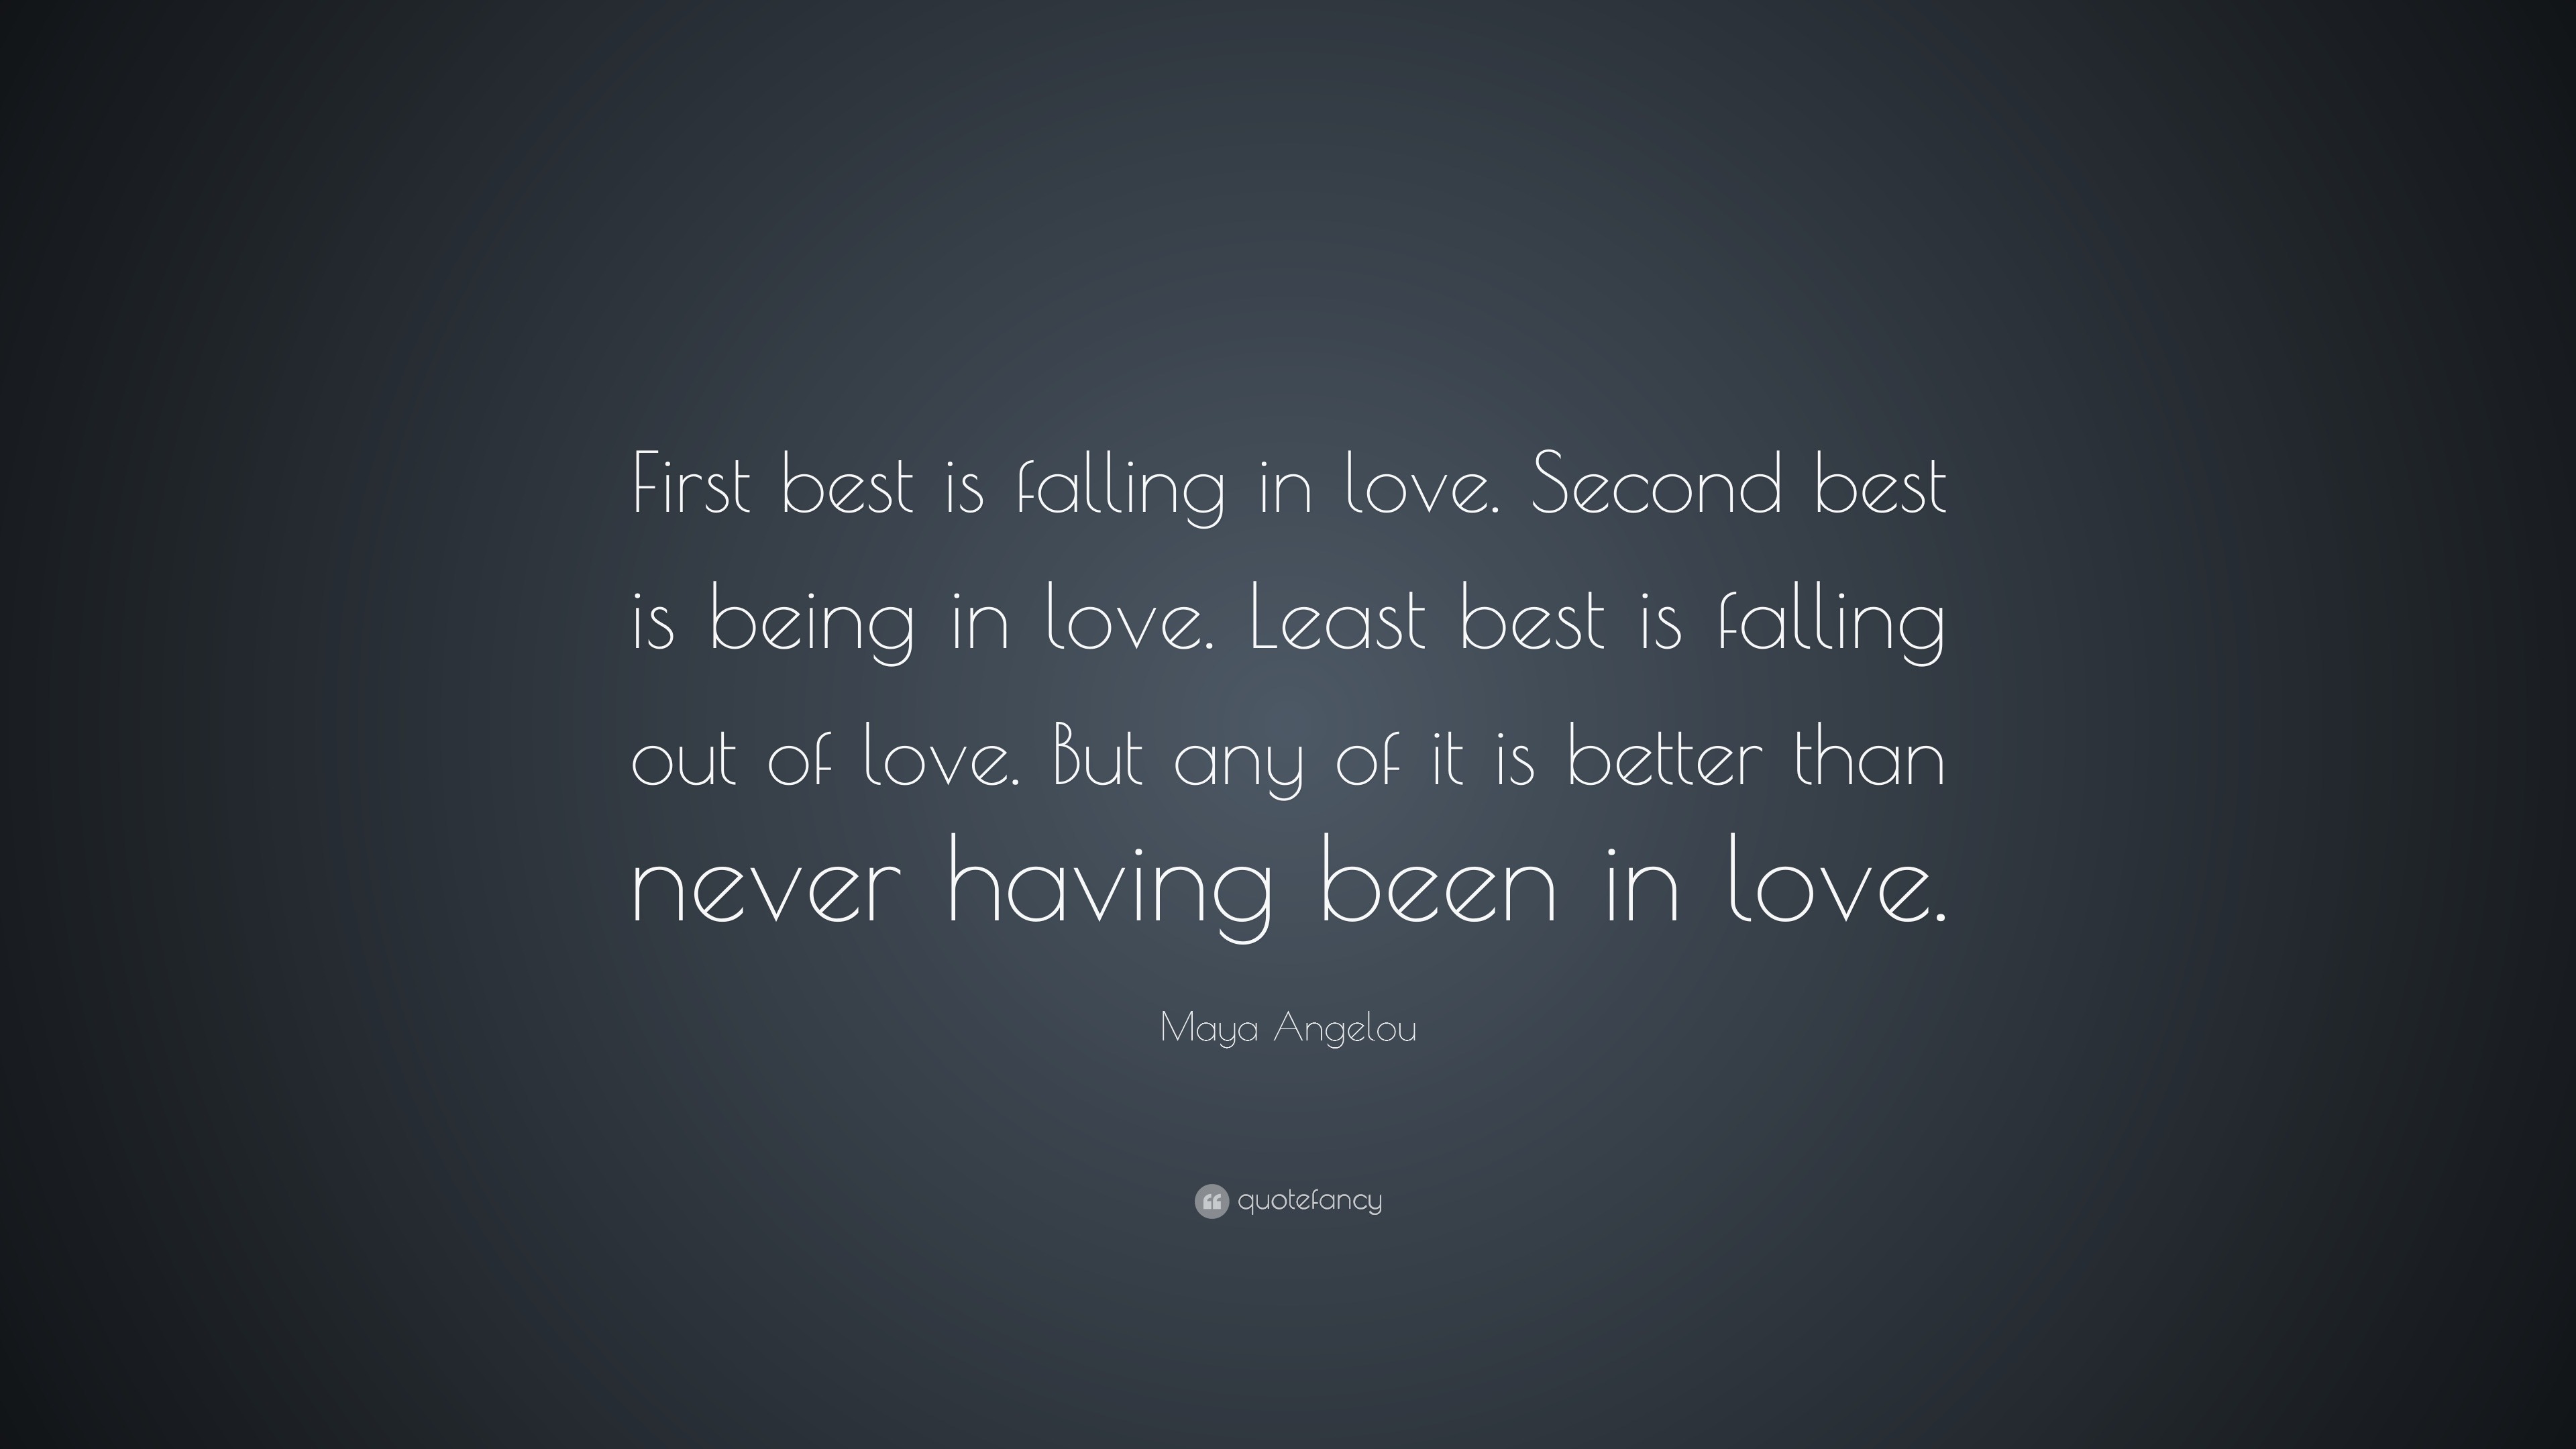 Maya Angelou Quote “First best is falling in love Second best is being